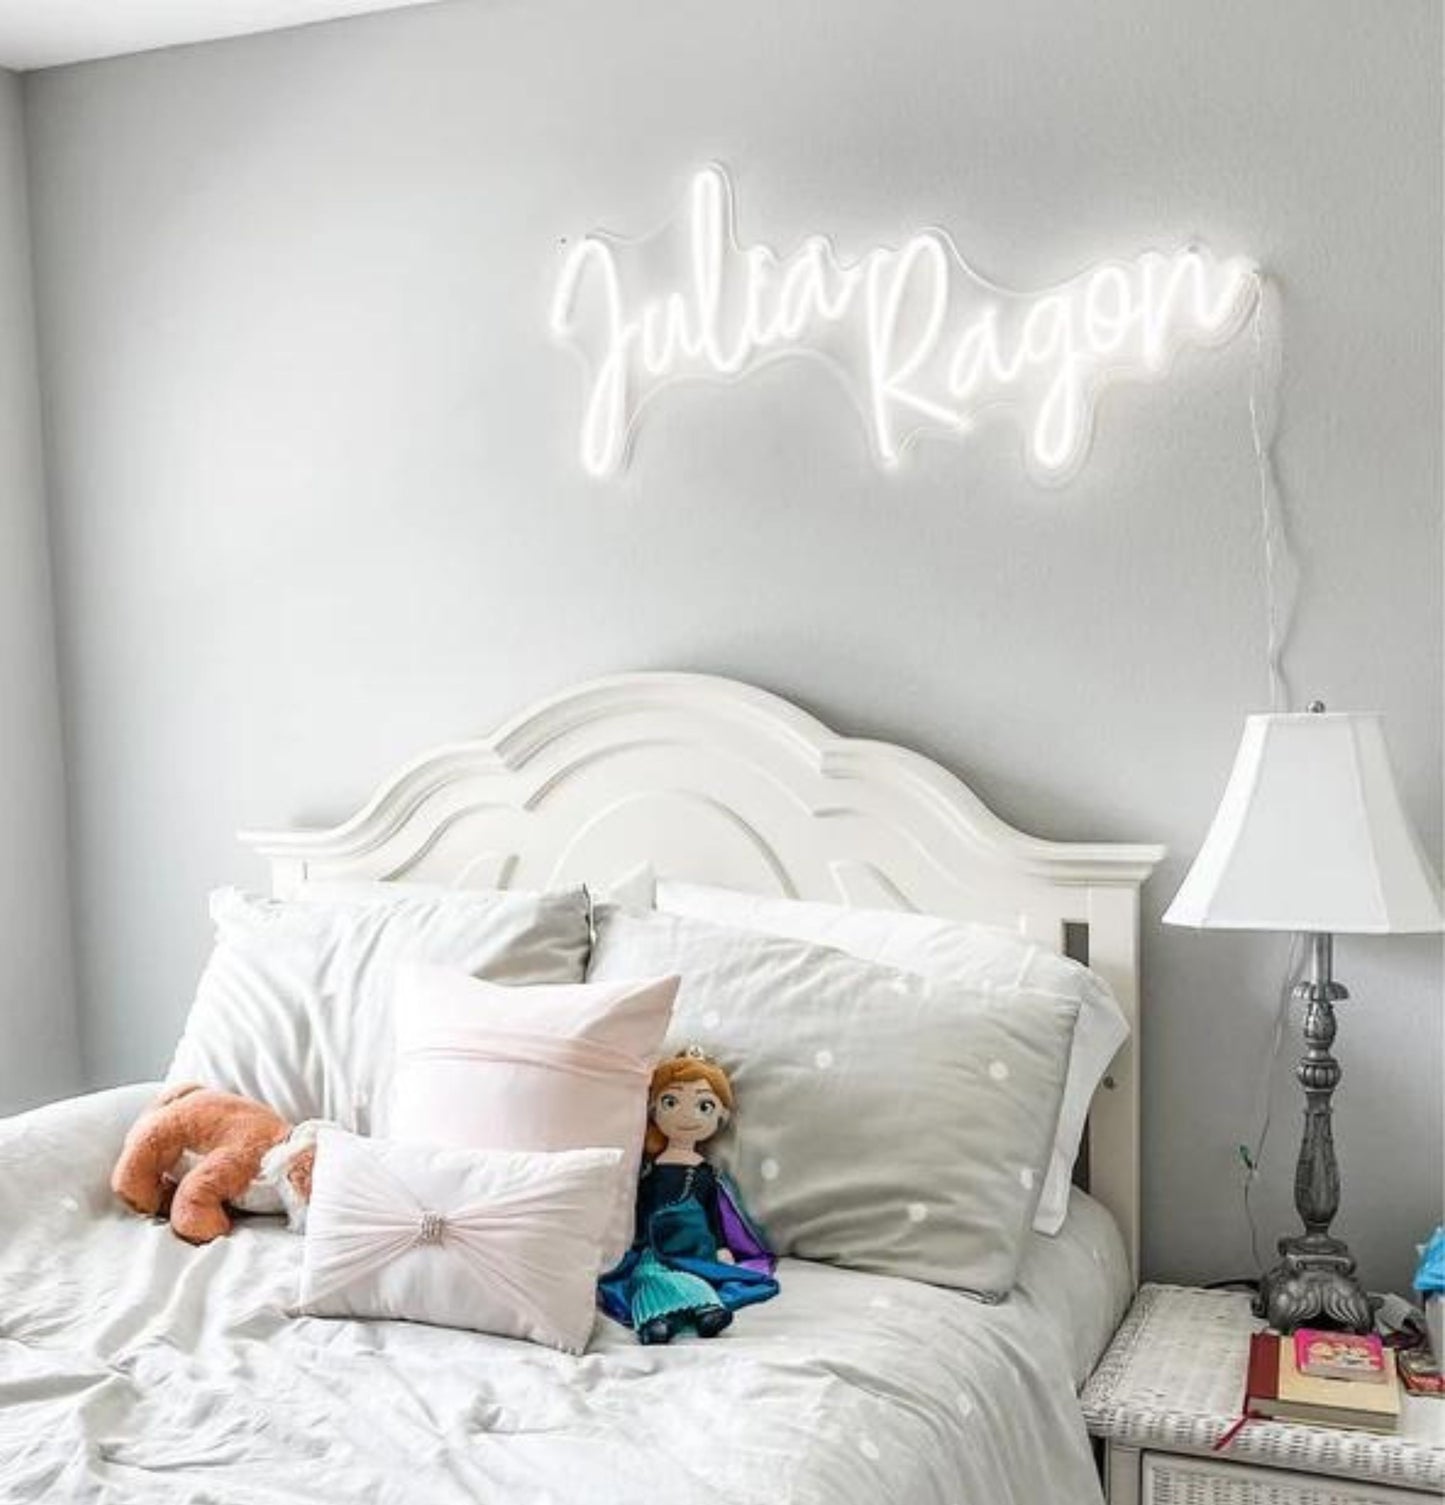 The Julia Staggered Kids Neon Sign